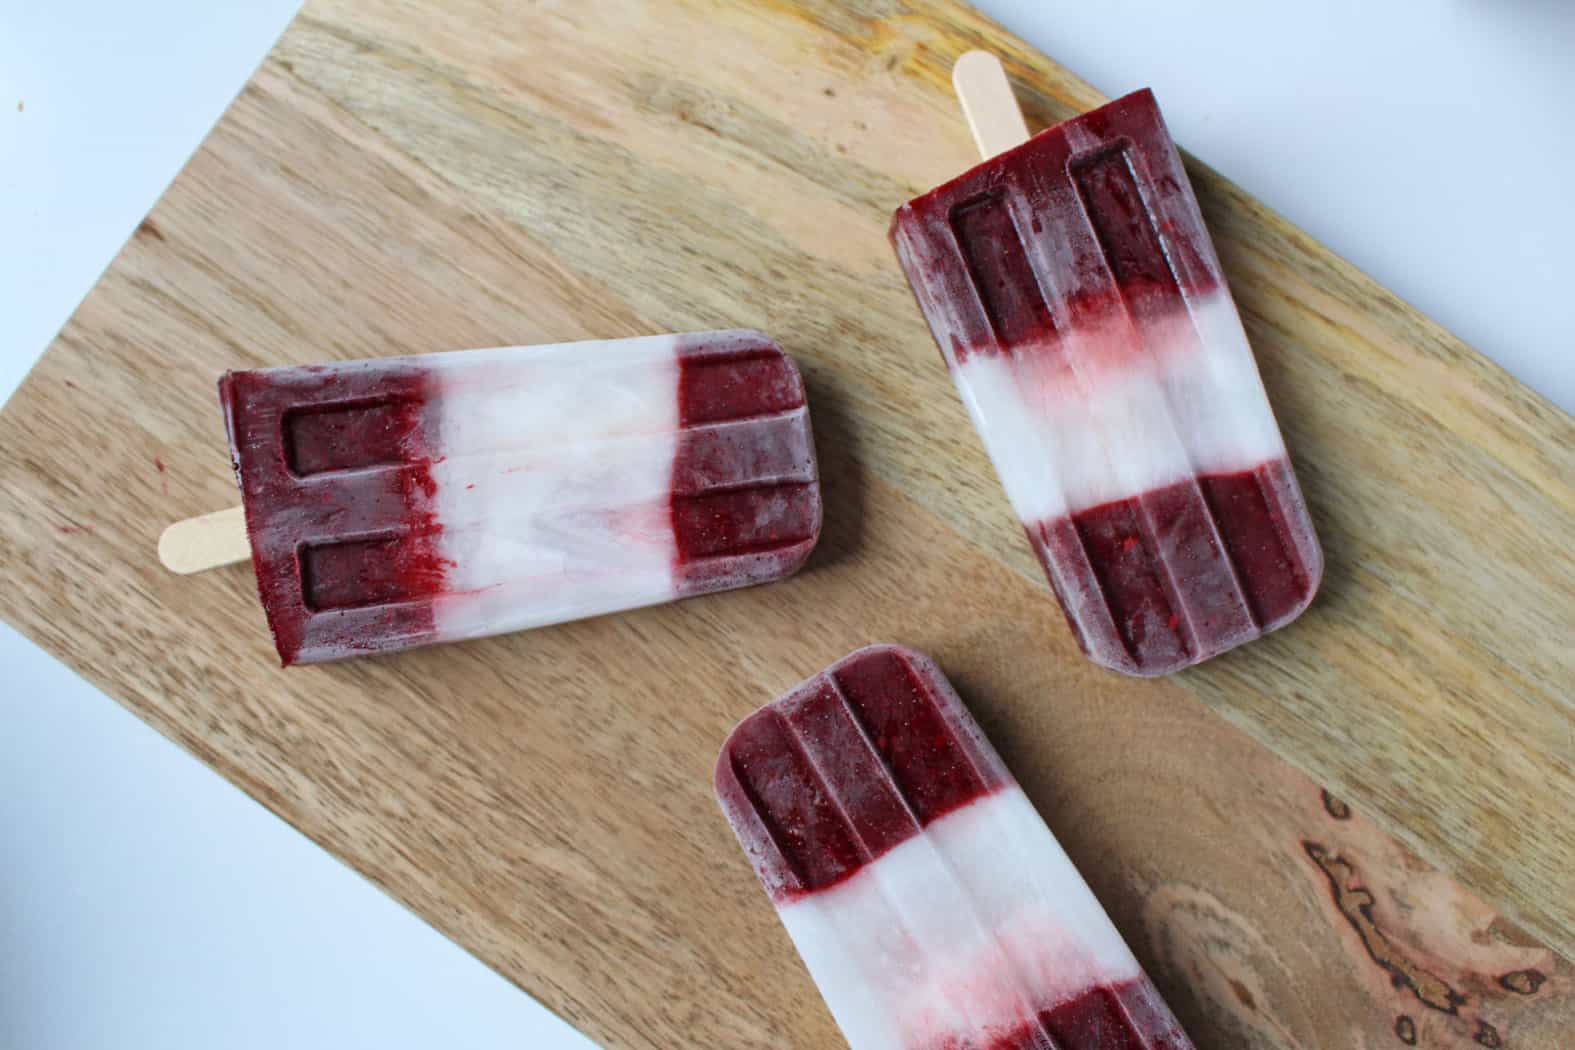 Superfood Popsicles5 10